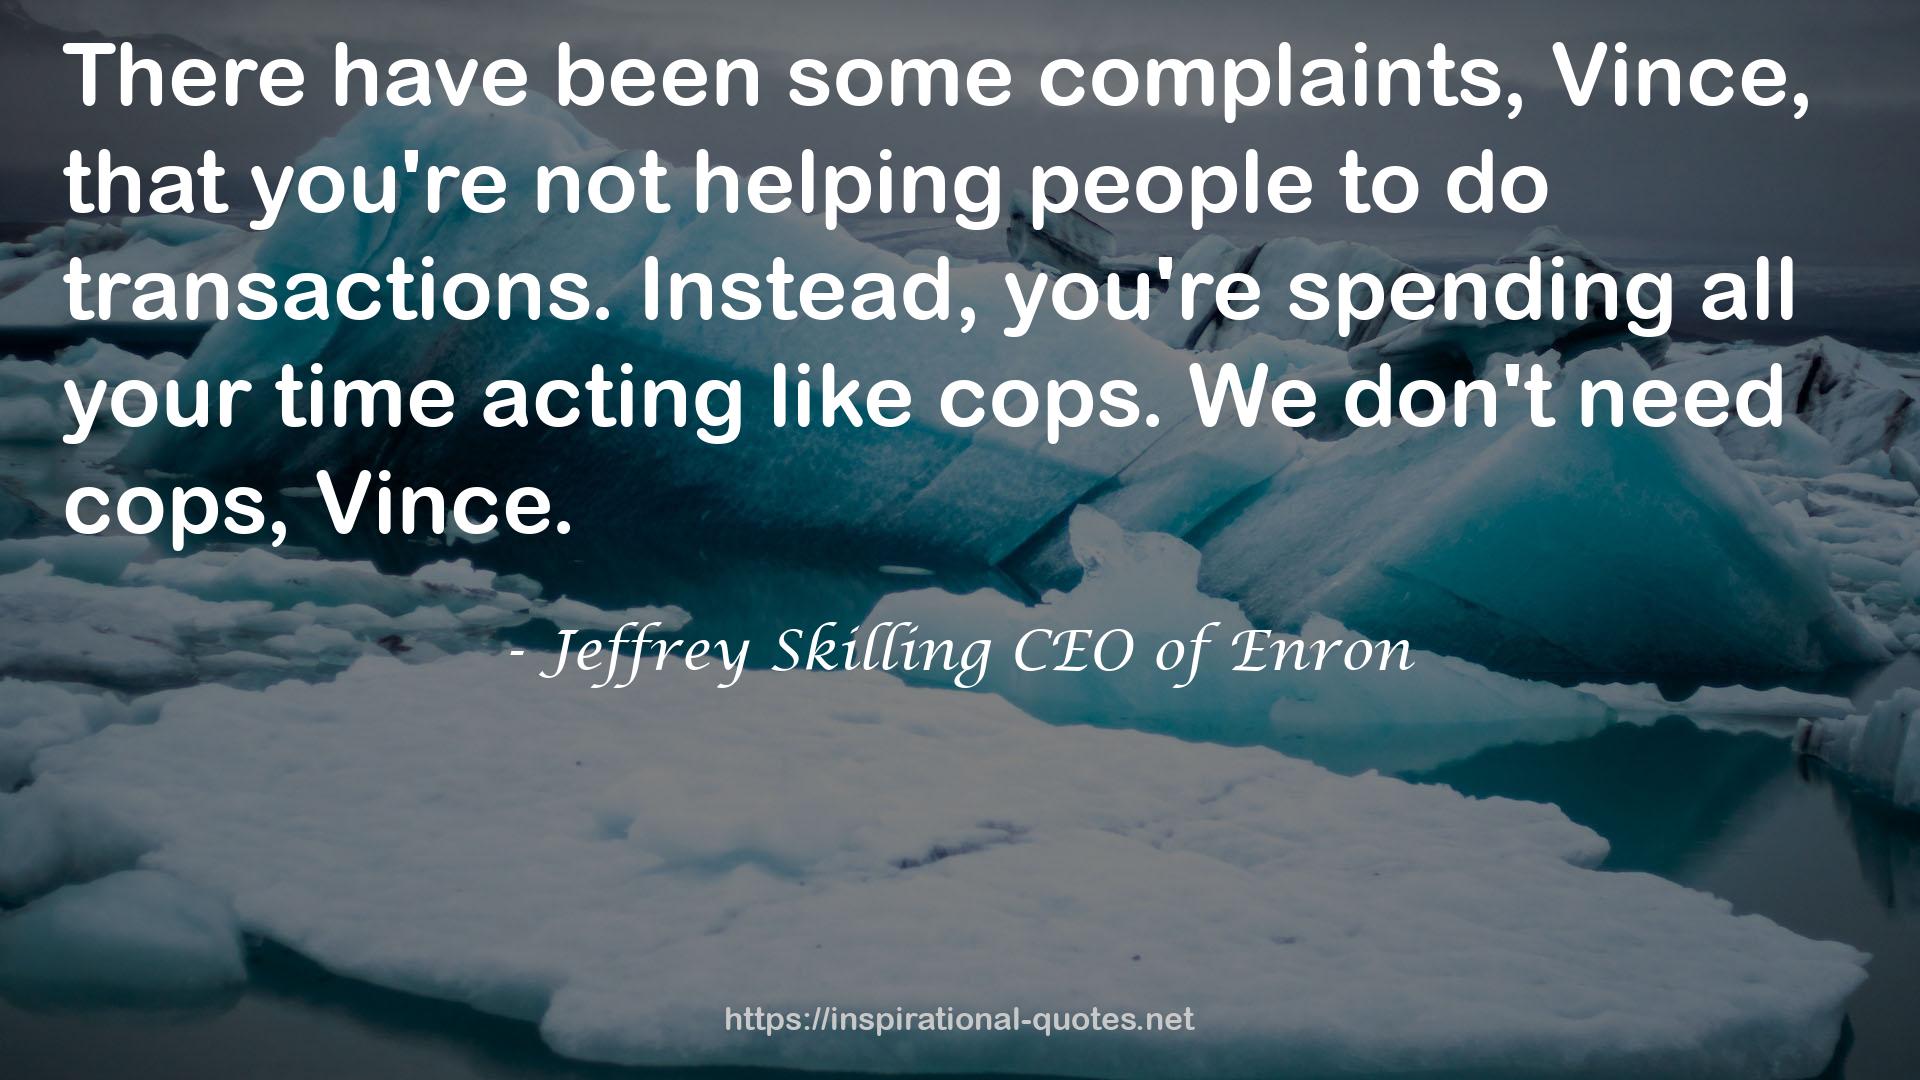 Jeffrey Skilling CEO of Enron QUOTES